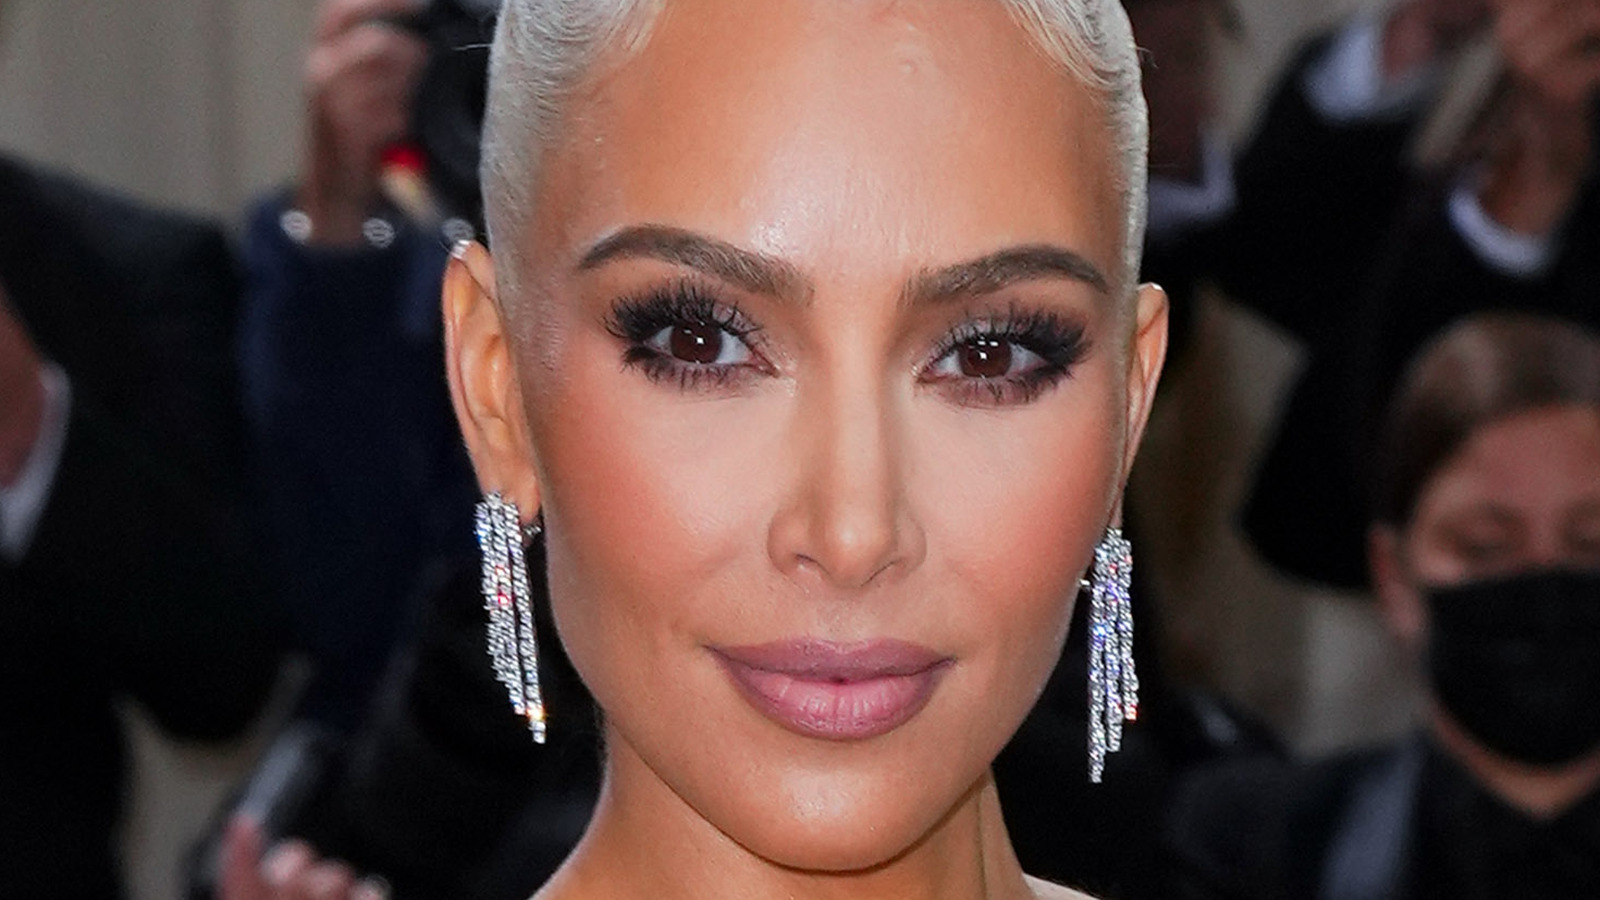 Kim Kardashian Fans Have Mixed Reactions To Her Sports Illustrated Cover